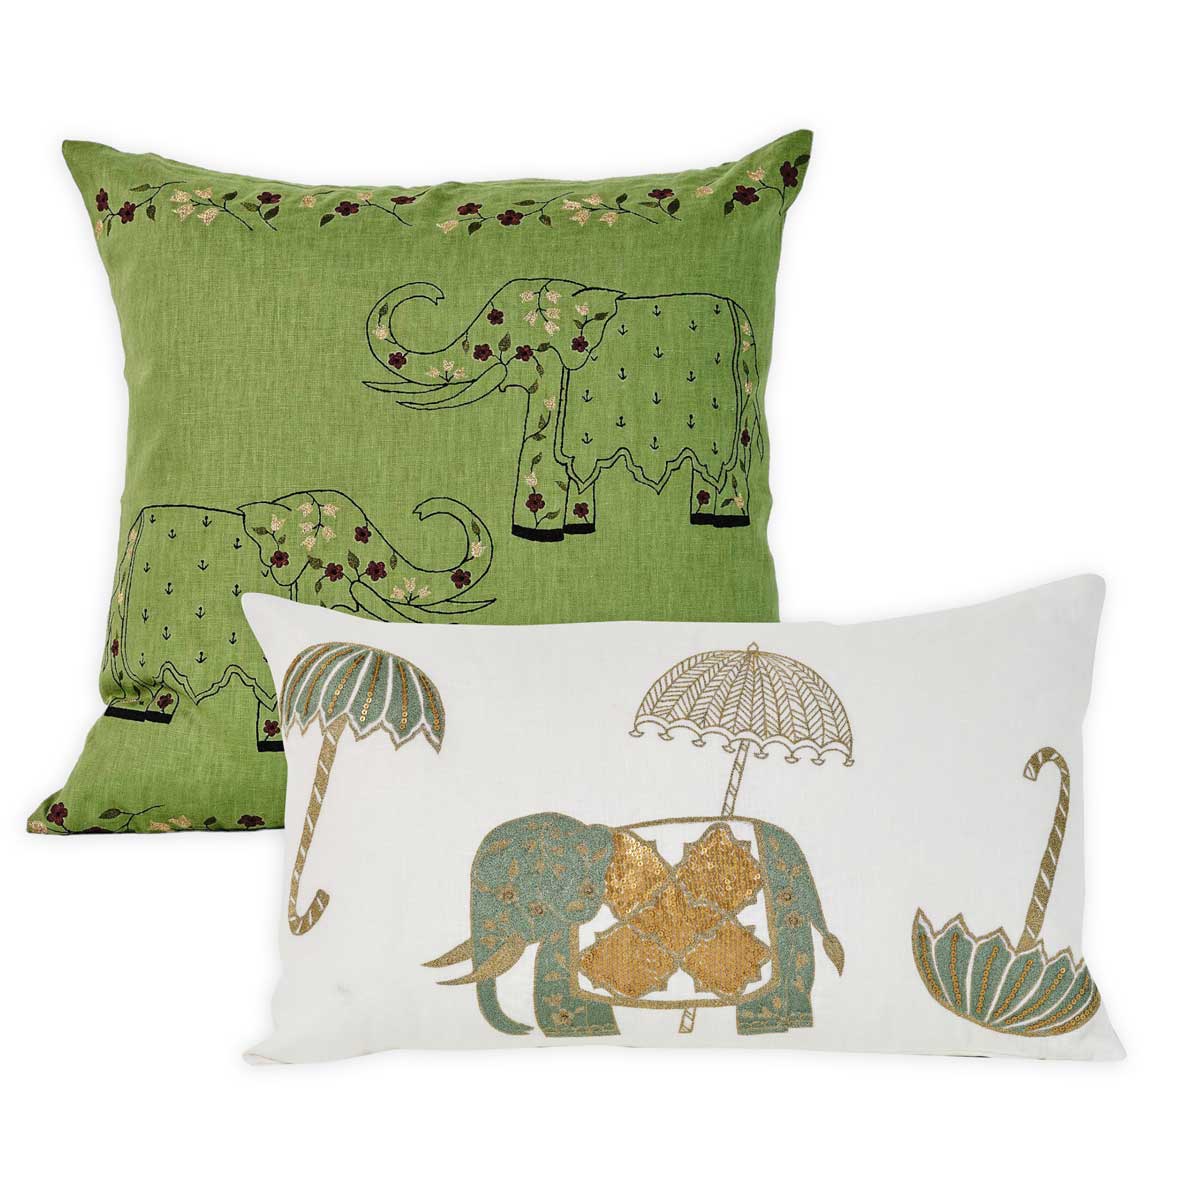 Haathee Embroidered Cushion Set of 2